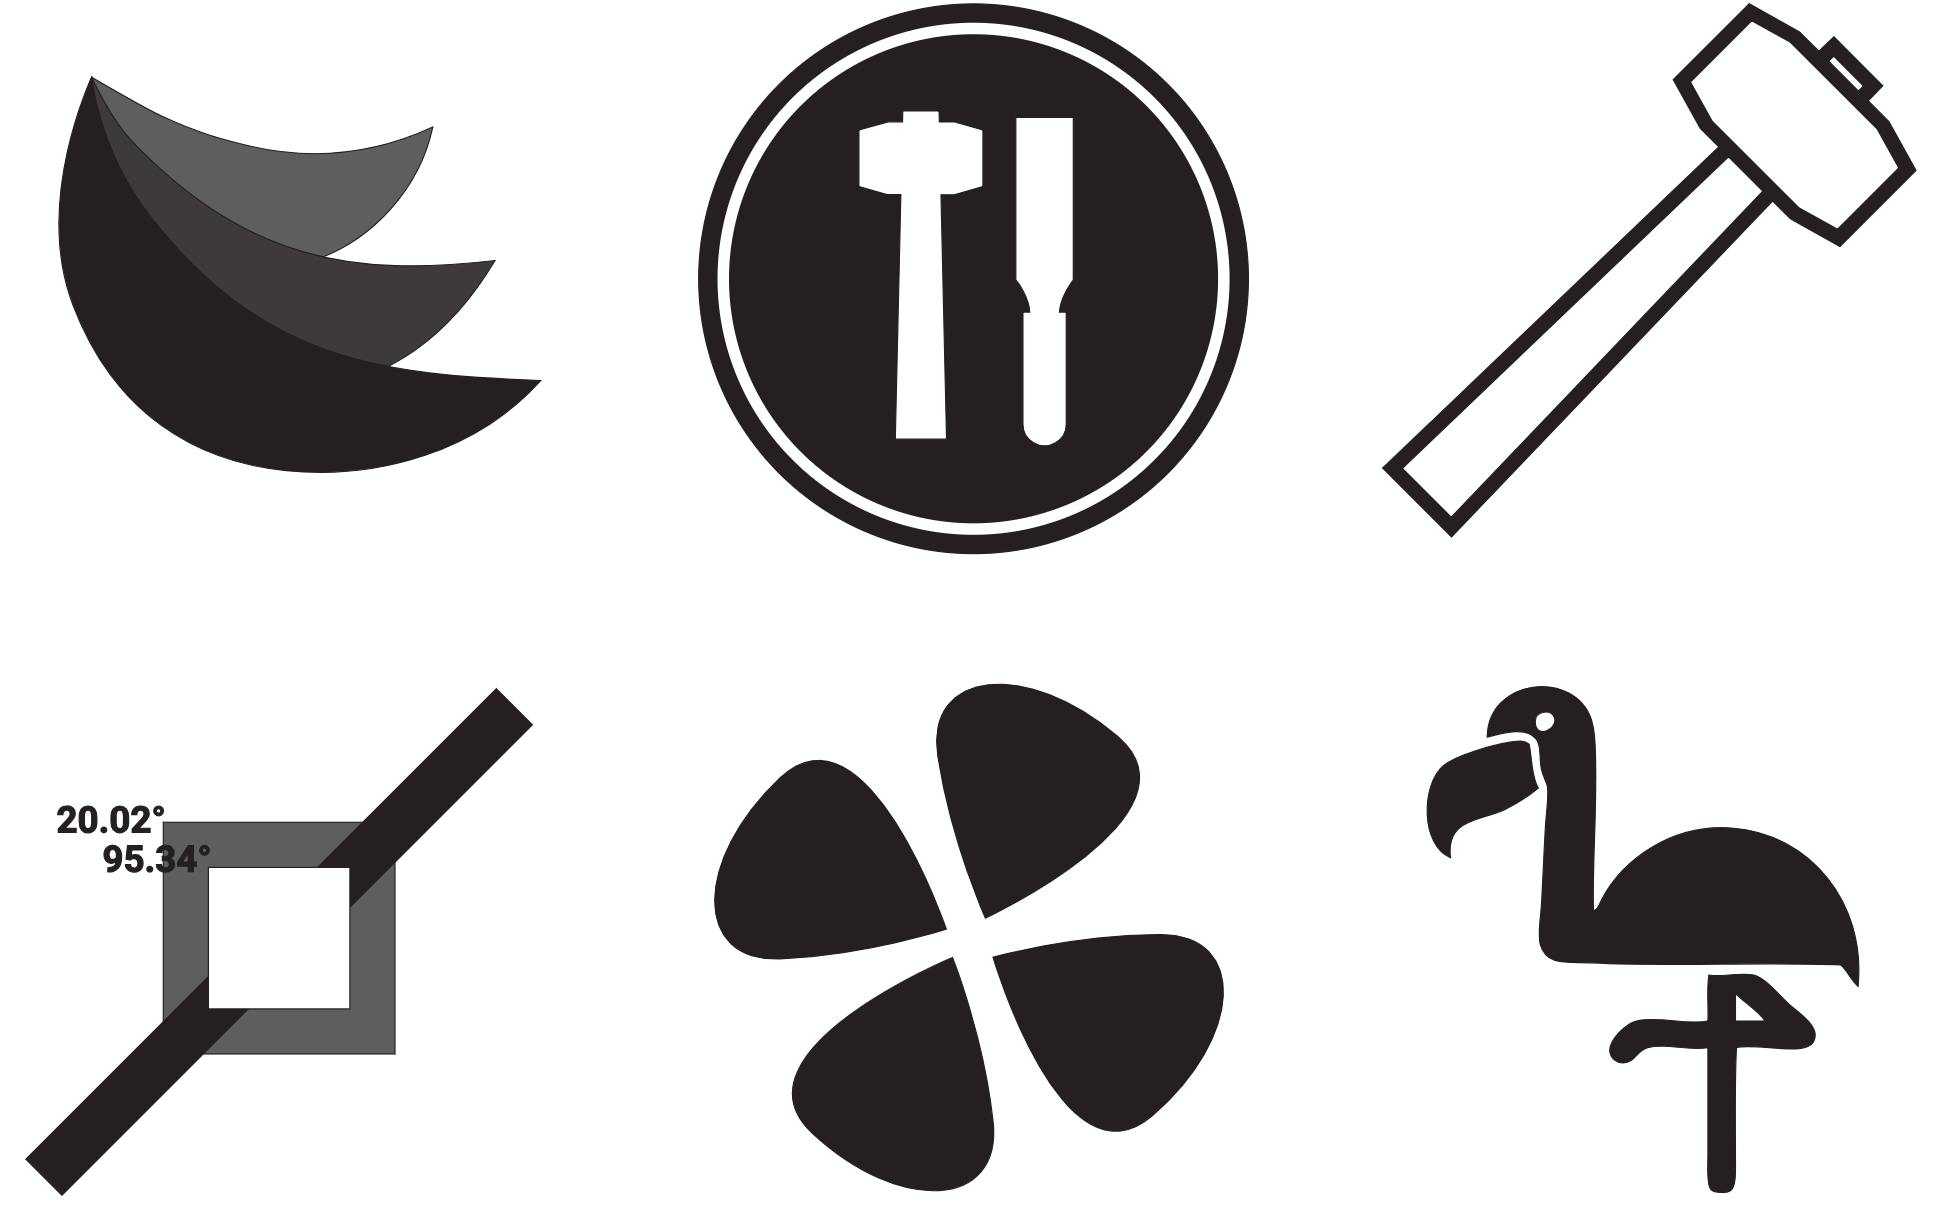 A sample of logo’s taken from Logos With Design